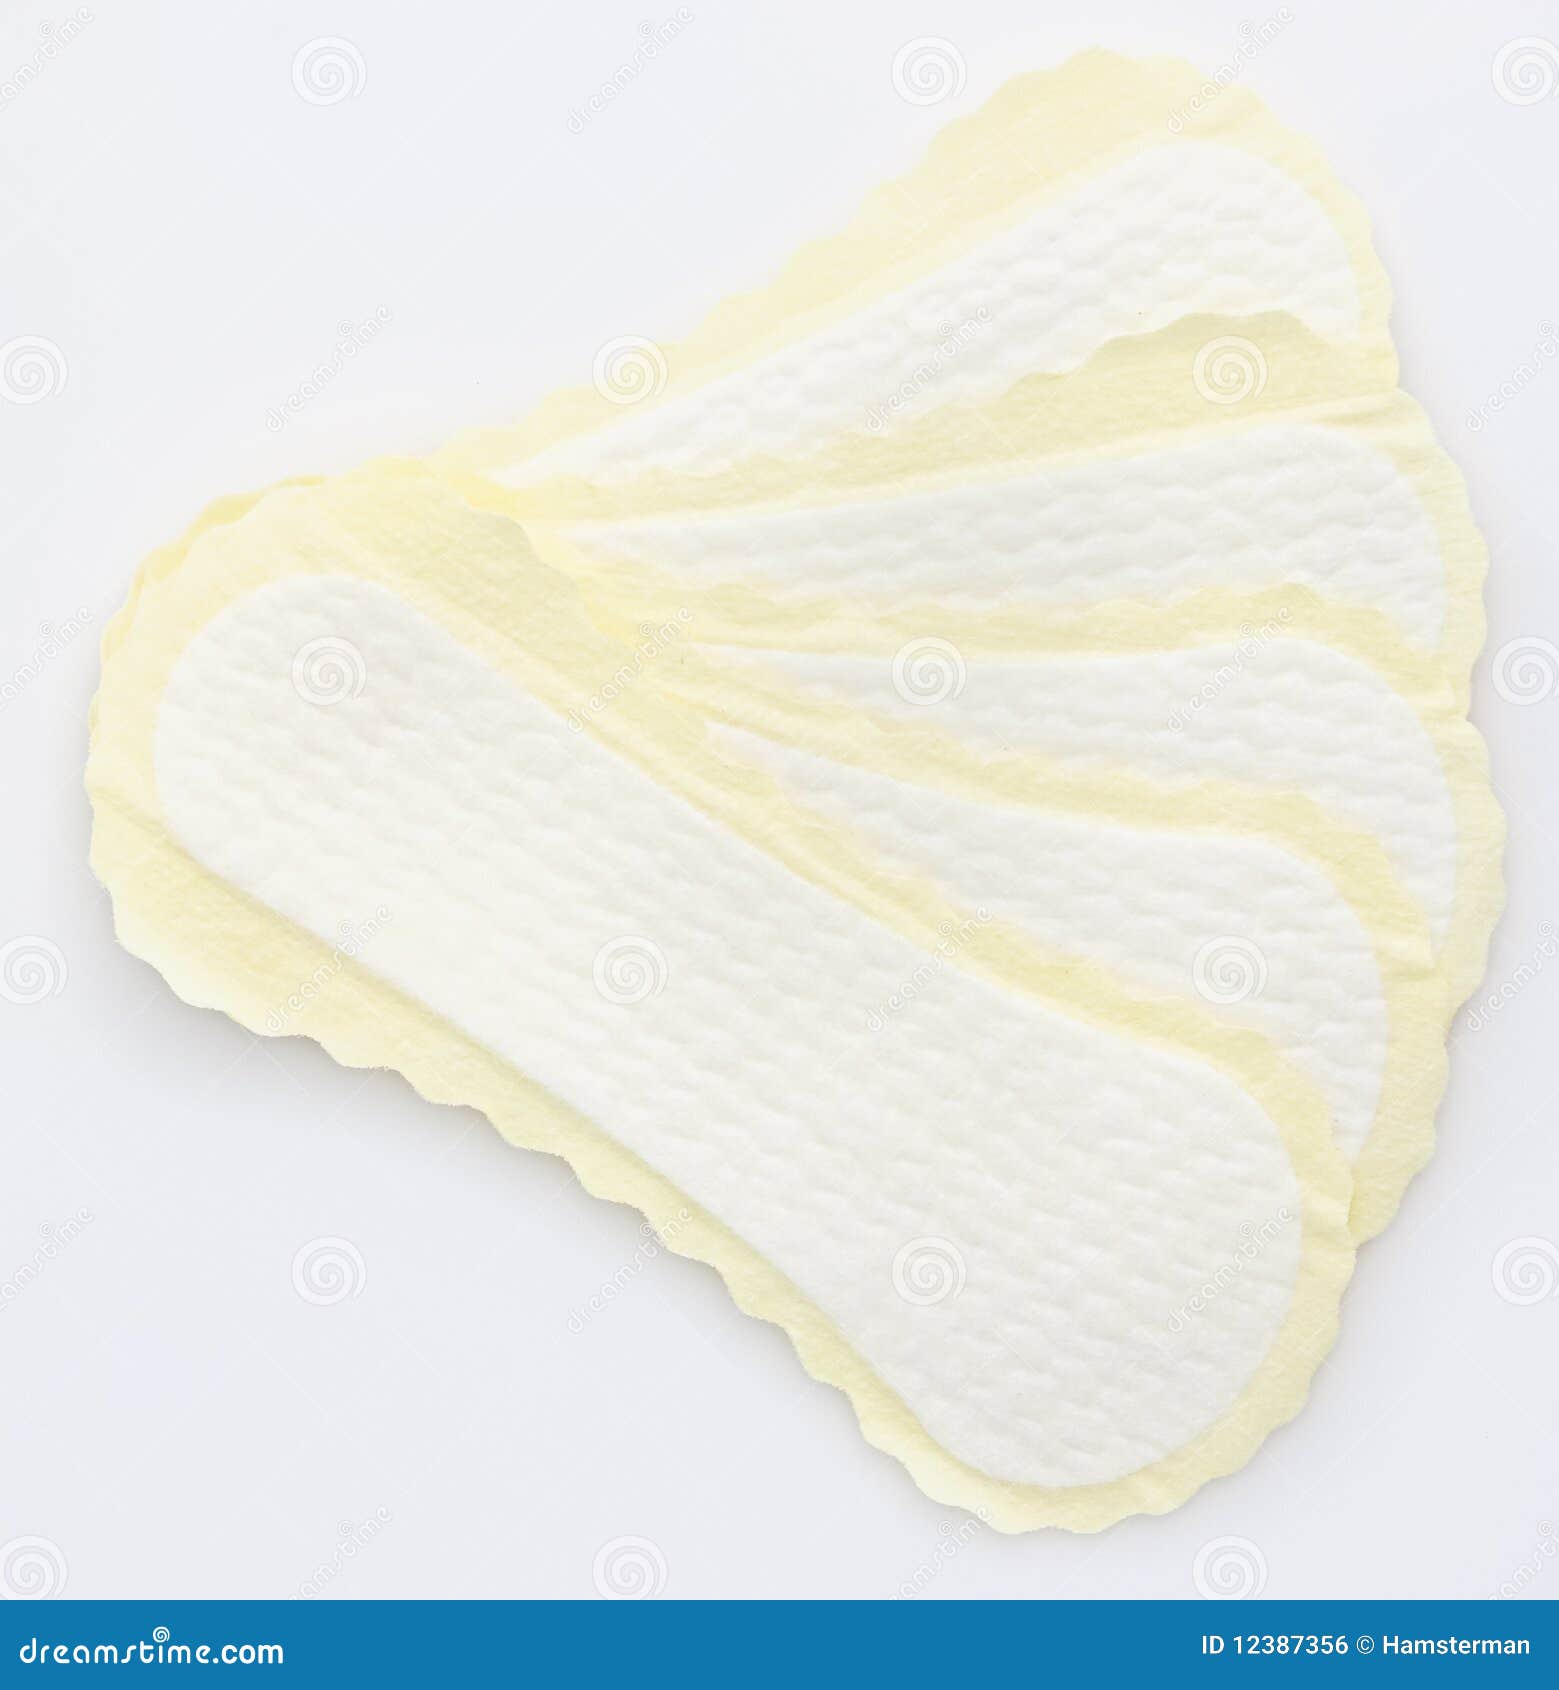 panty liners with yellowish wrap-around wings